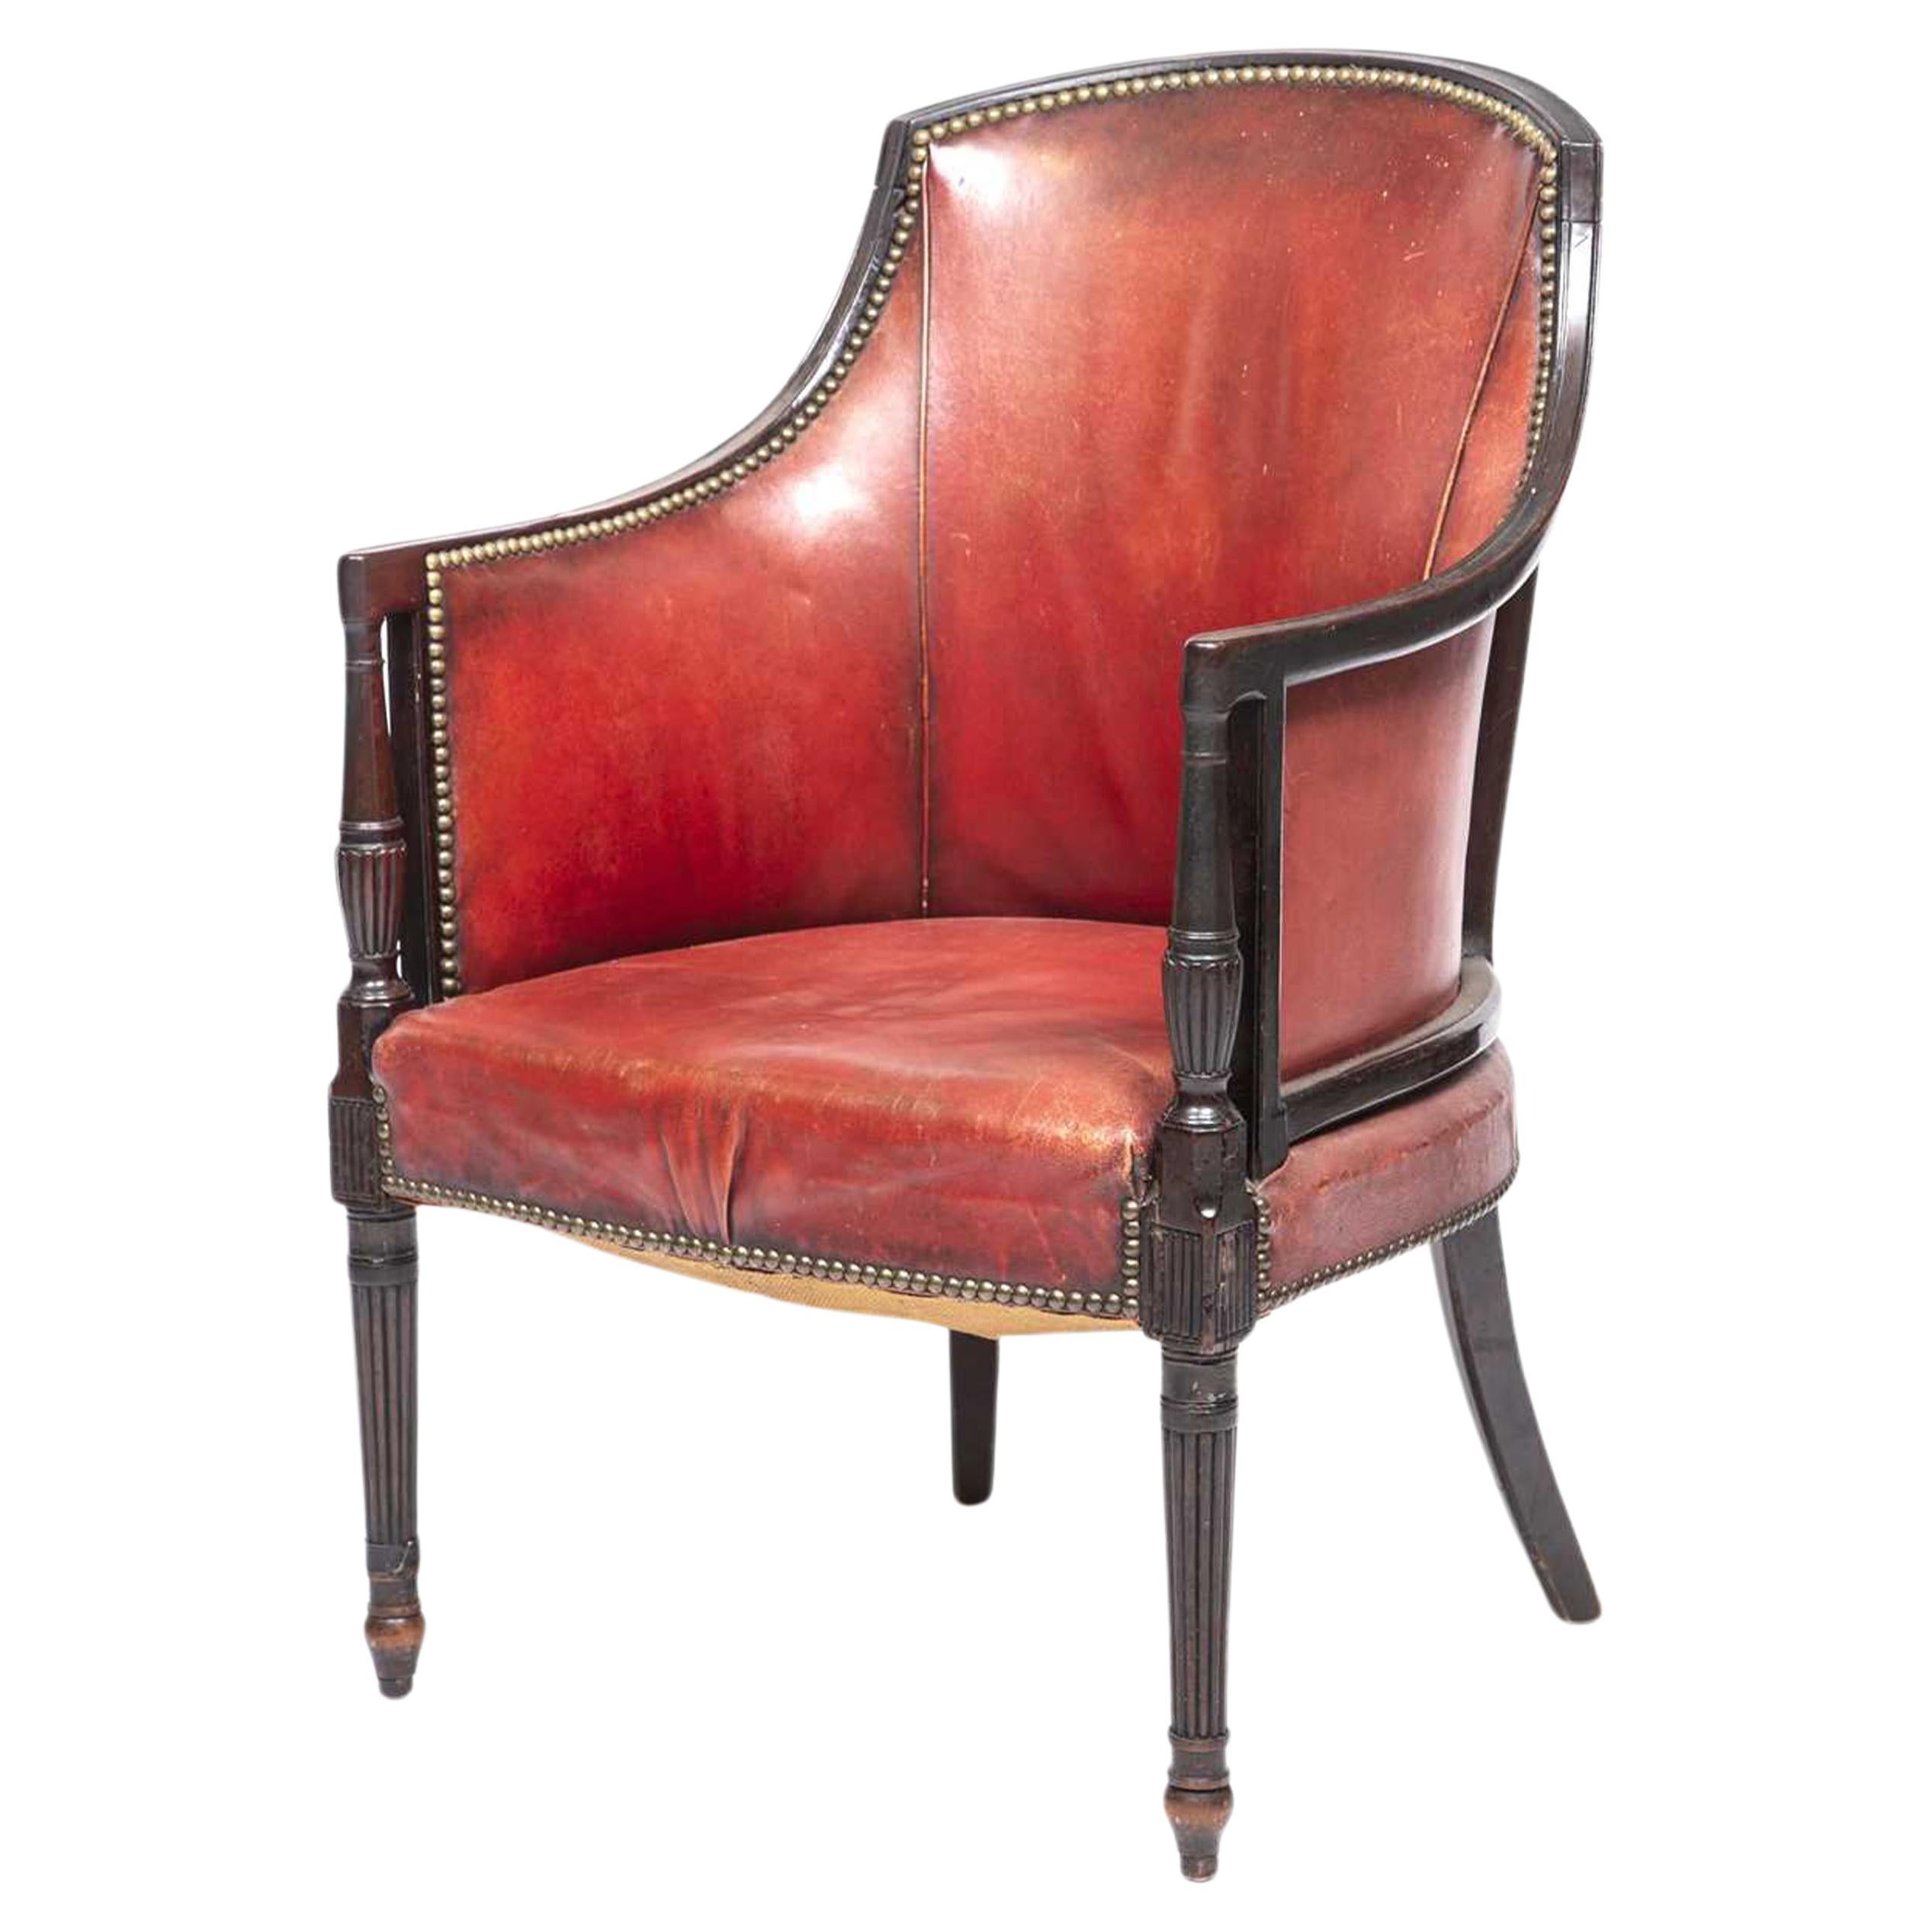 19th century Red Leather Library Tub Chair With Brass Stud Detailing & Reeded Front Legs from the The Oxford Library, Oxford, England. 

Other dimensions 

Height to arms 66cm
Height to seat 41

Depth of seat 49cm
Width of seat at widest